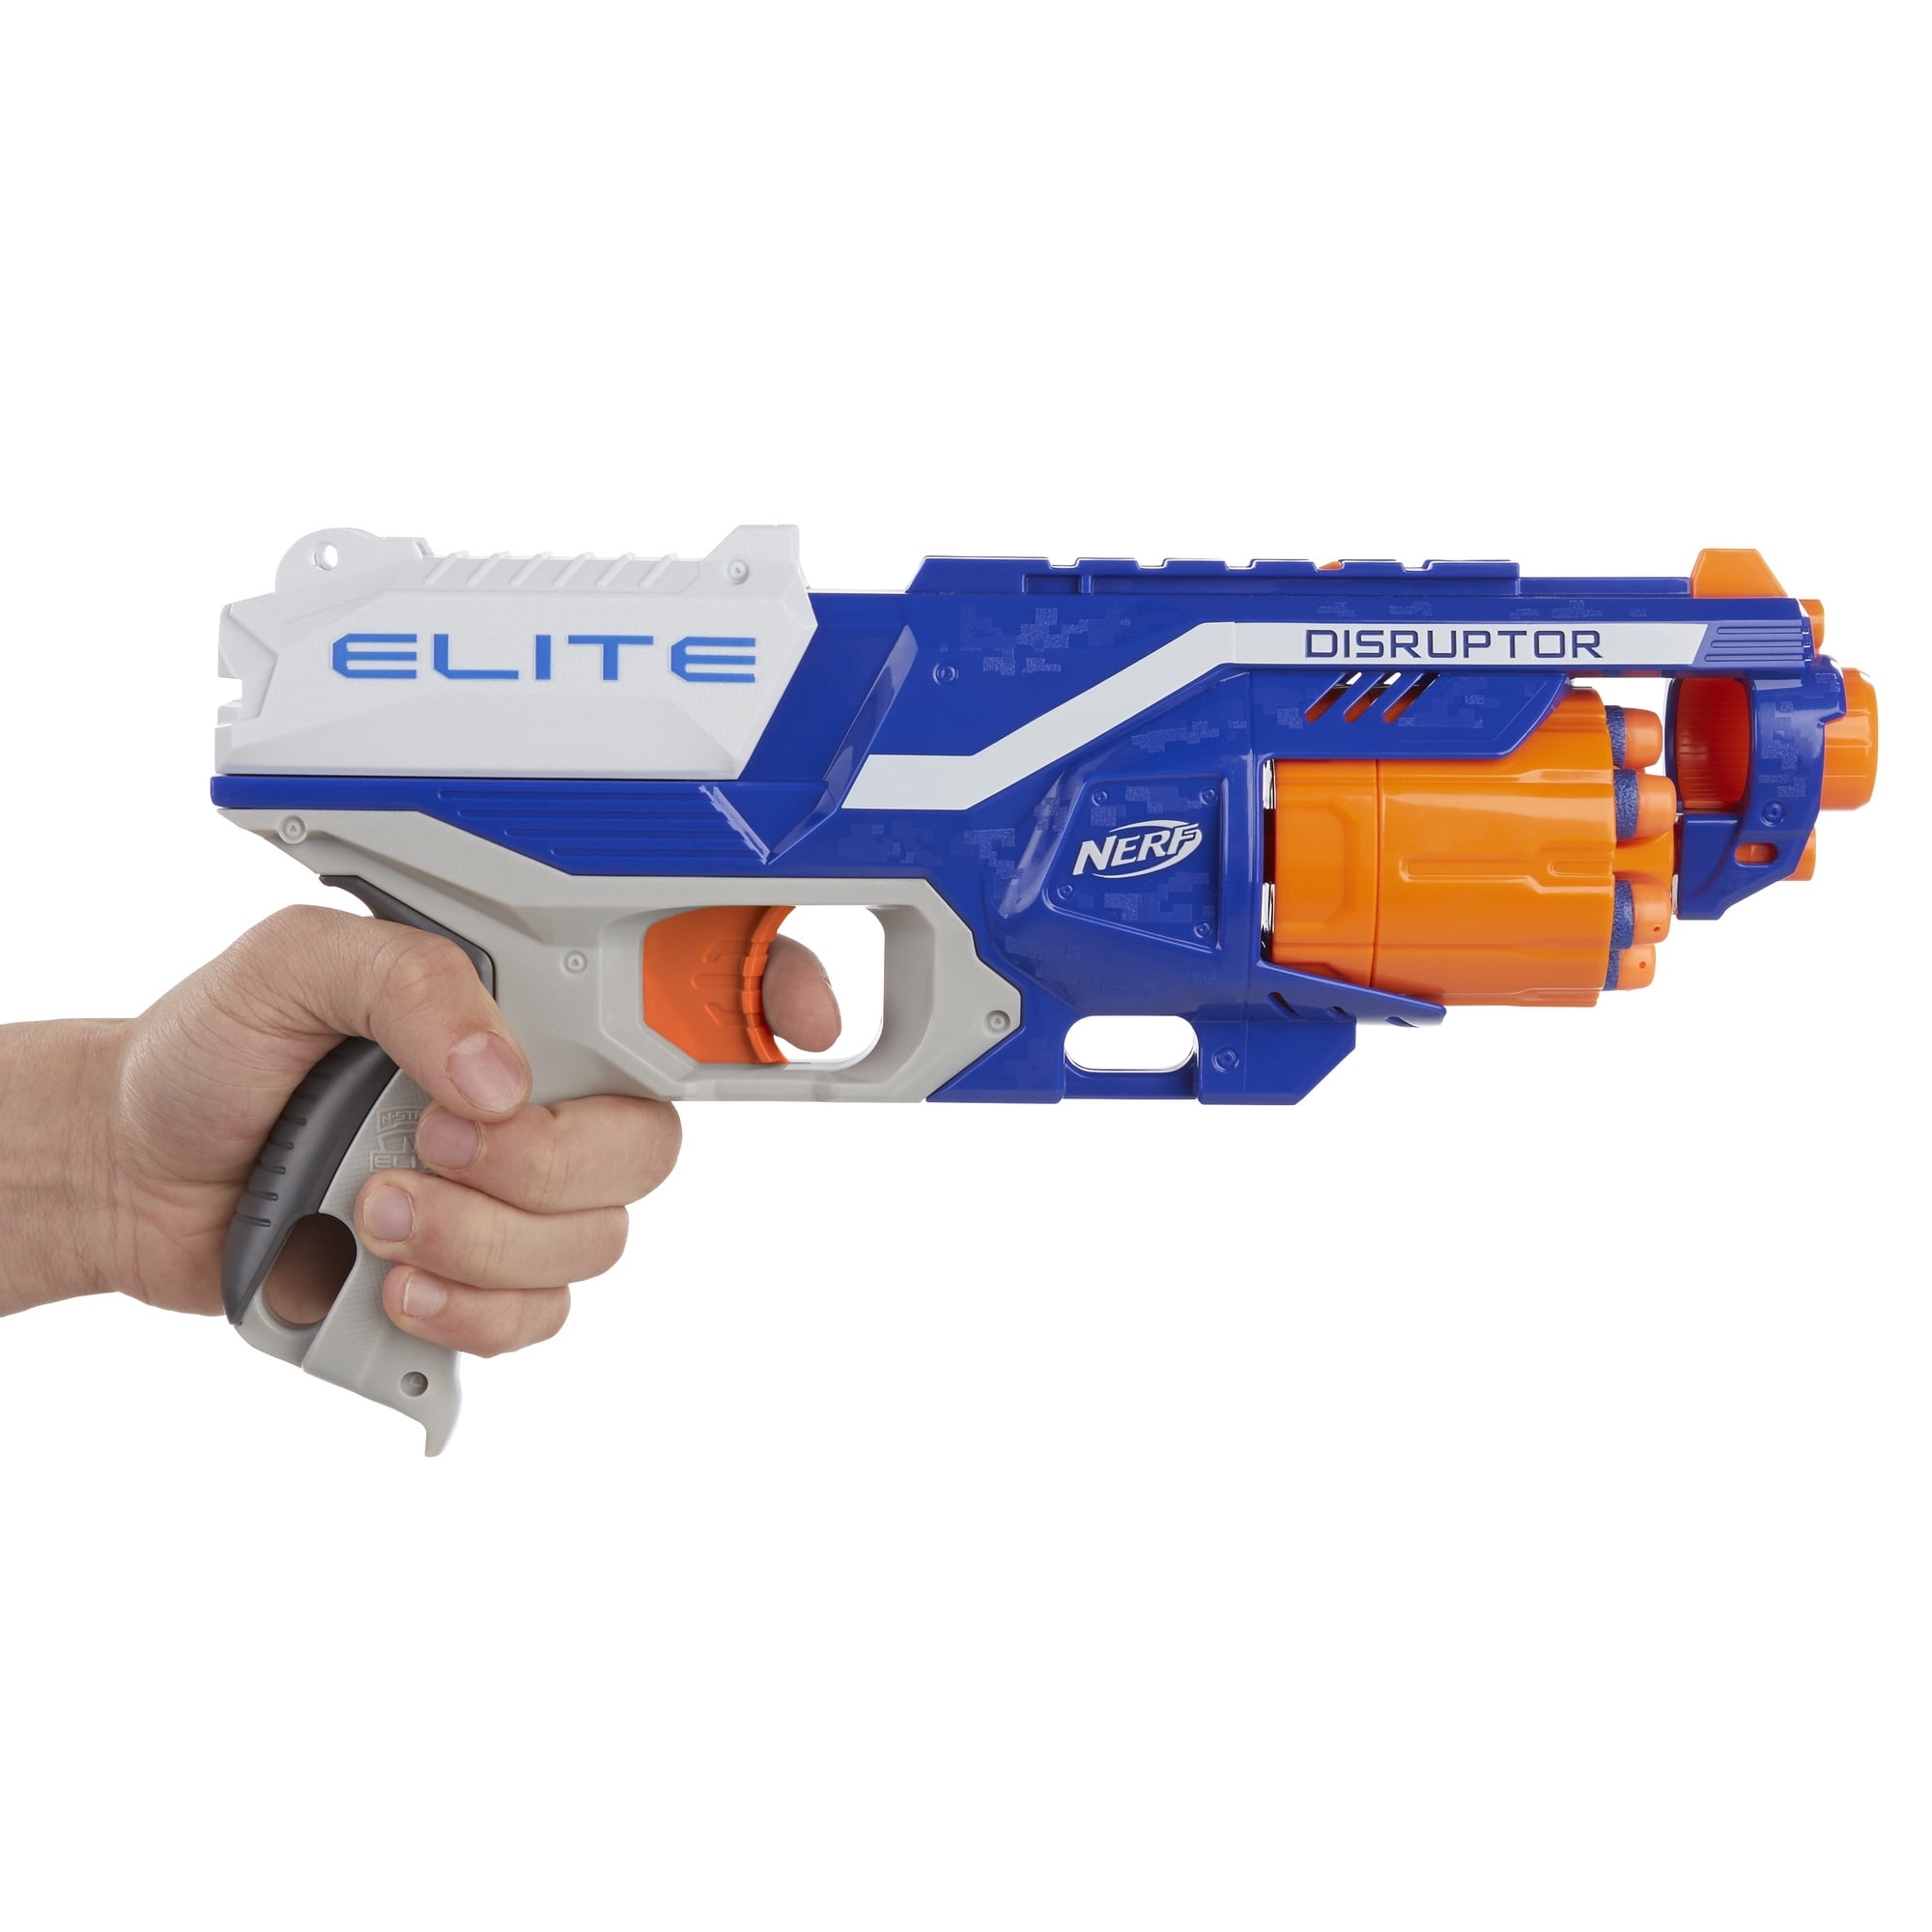  Nerf Disruptor Elite Blaster - 6-Dart Rotating Drum, Slam Fire,  Includes 6 Official Nerf Elite Darts - for Kids, Teens, Adults, (  Exclusive) : Toys & Games